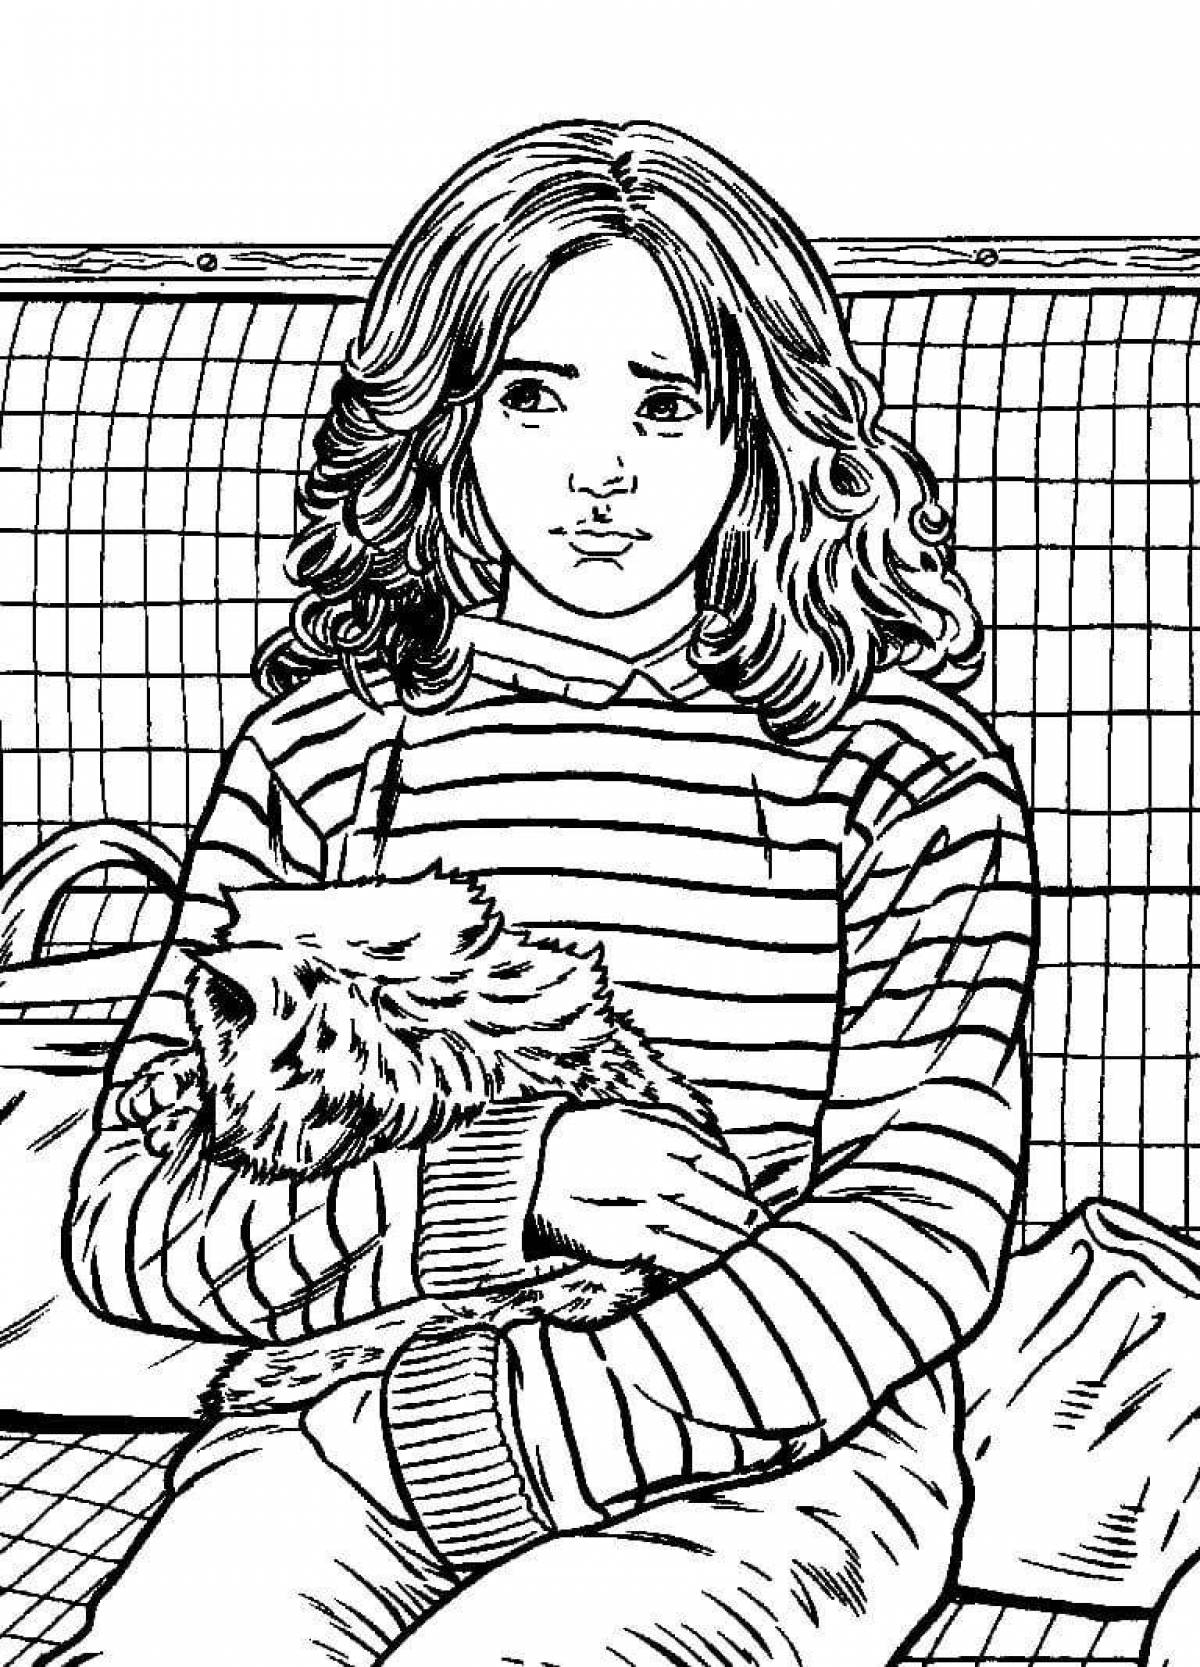 Hermione granger's adorable coloring page